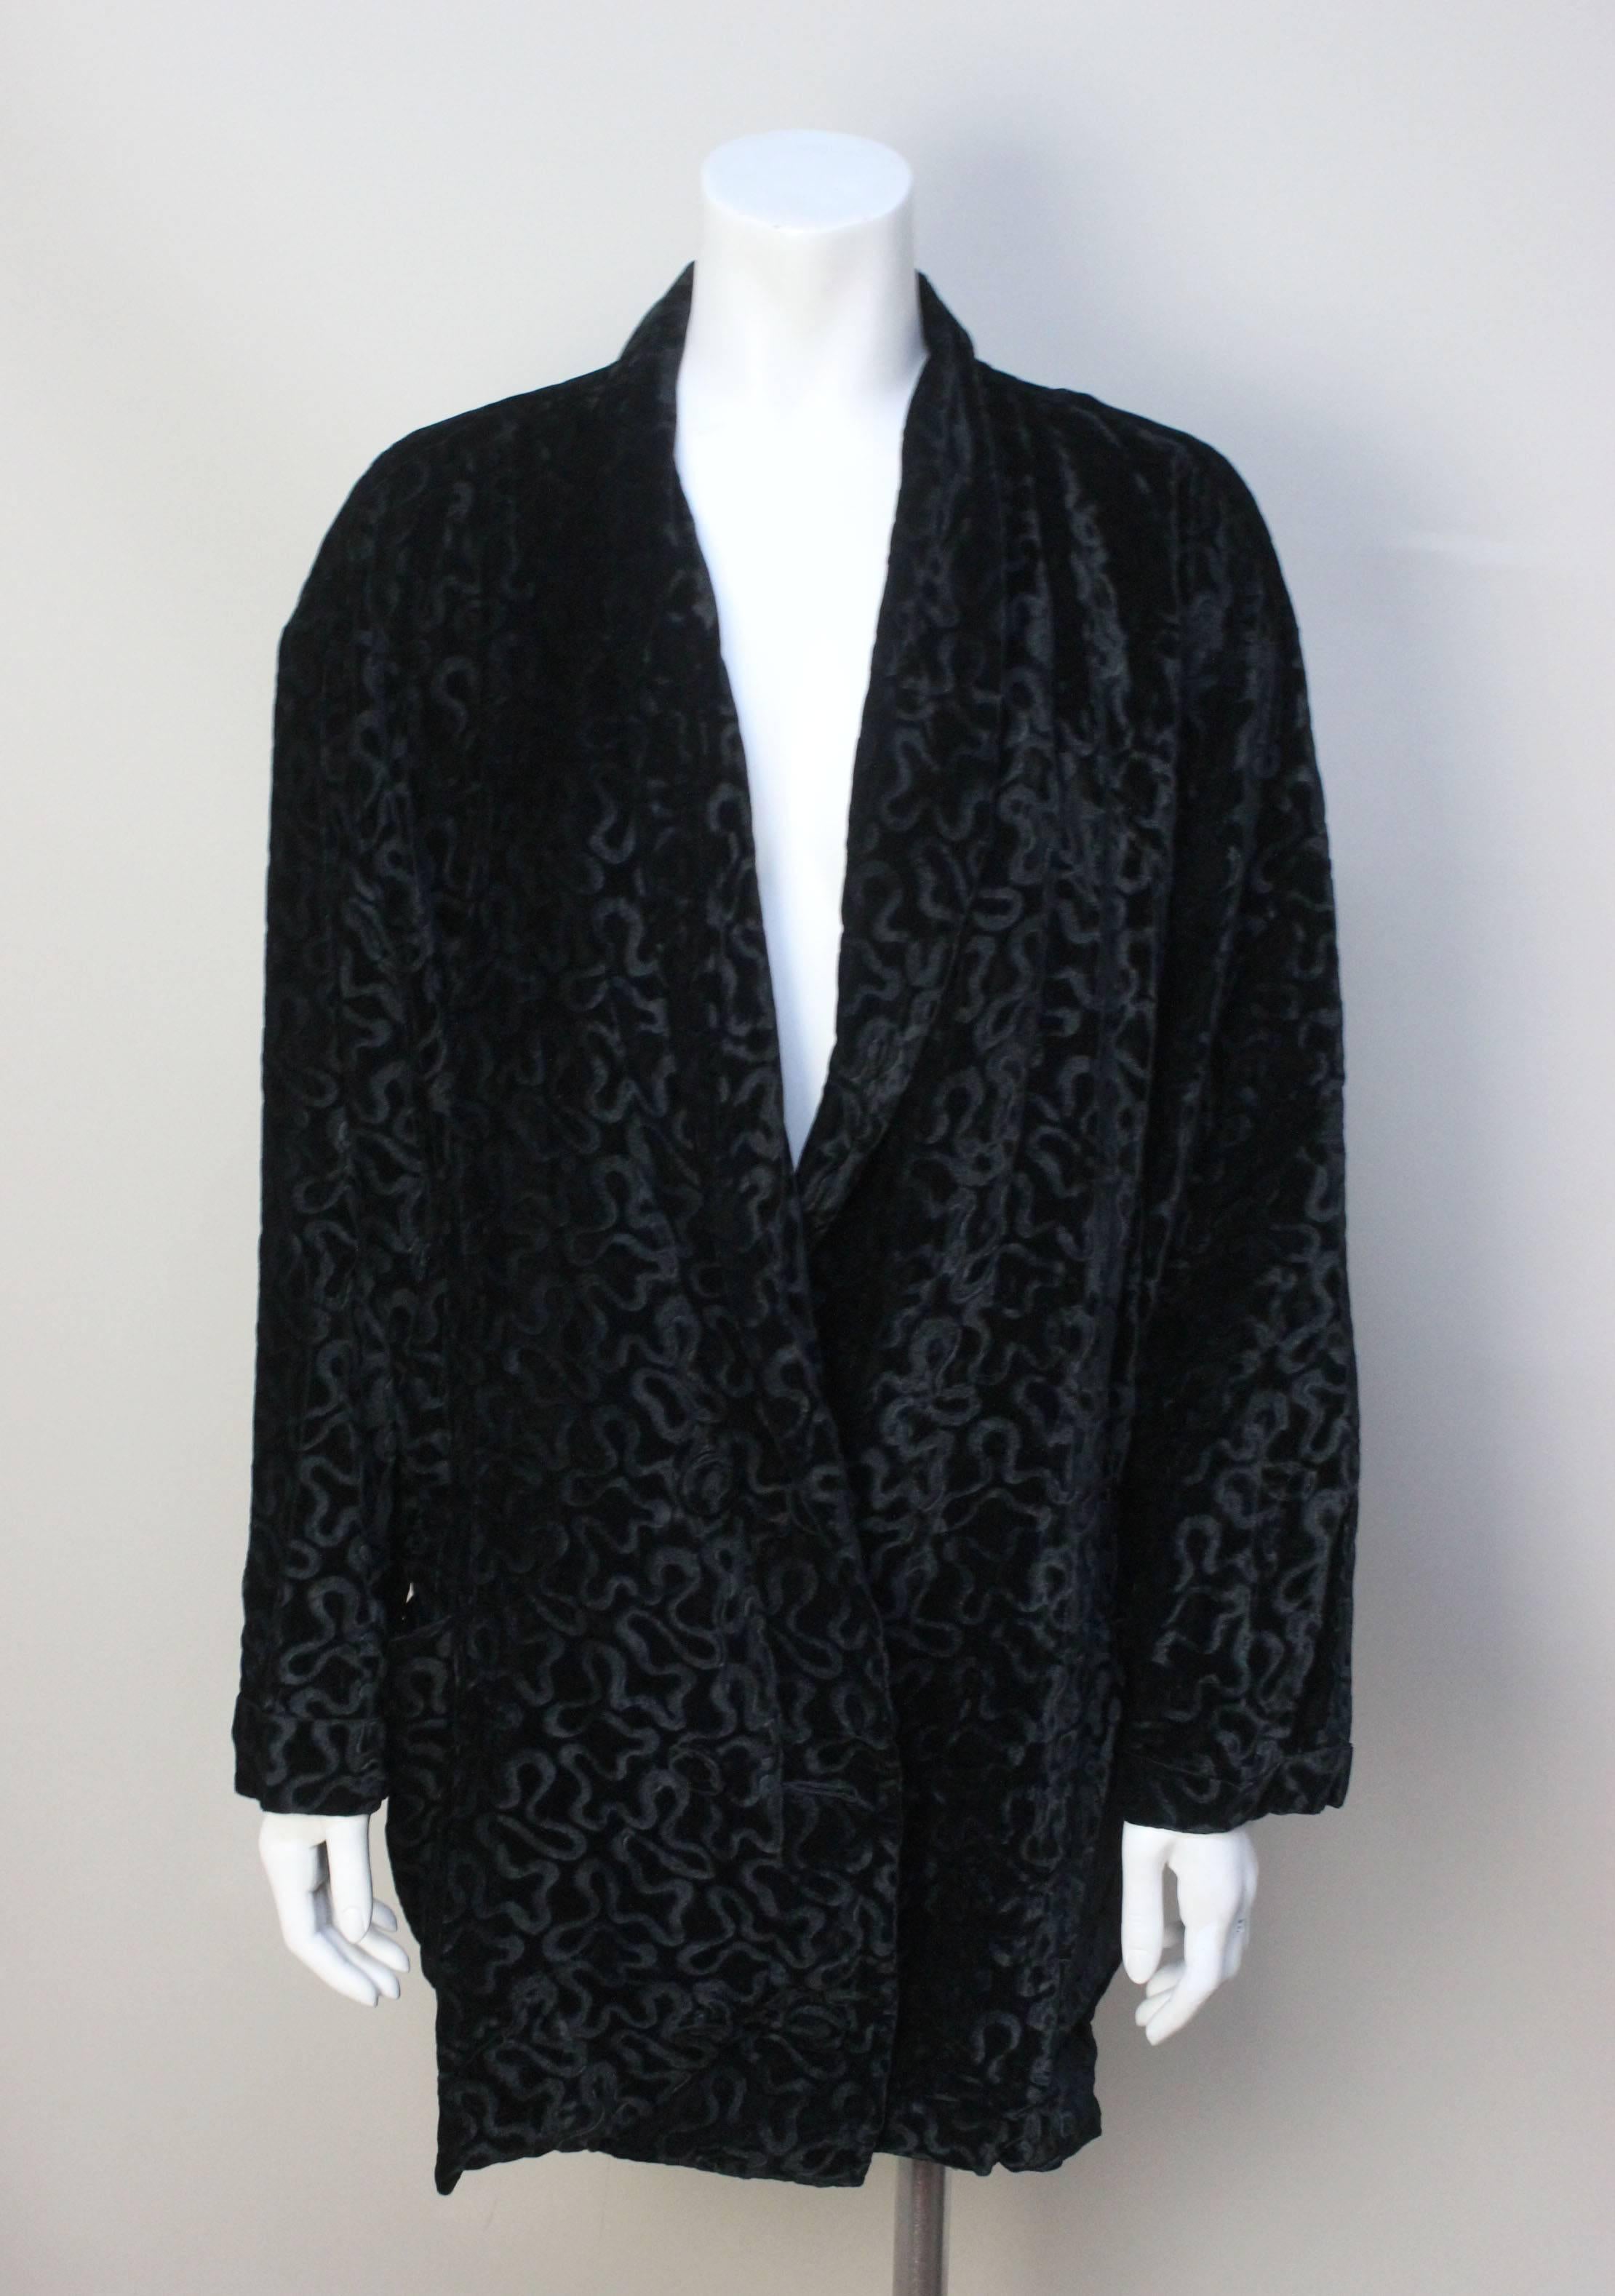 This jacket is a wonderful Norma Kamali design. The style is pure 1980's but very relevant to today's fashion. The fabric is a black inky burnout velvet in a swirl pattern. It has a long shawl collar with low double breasted buttons. Two large patch